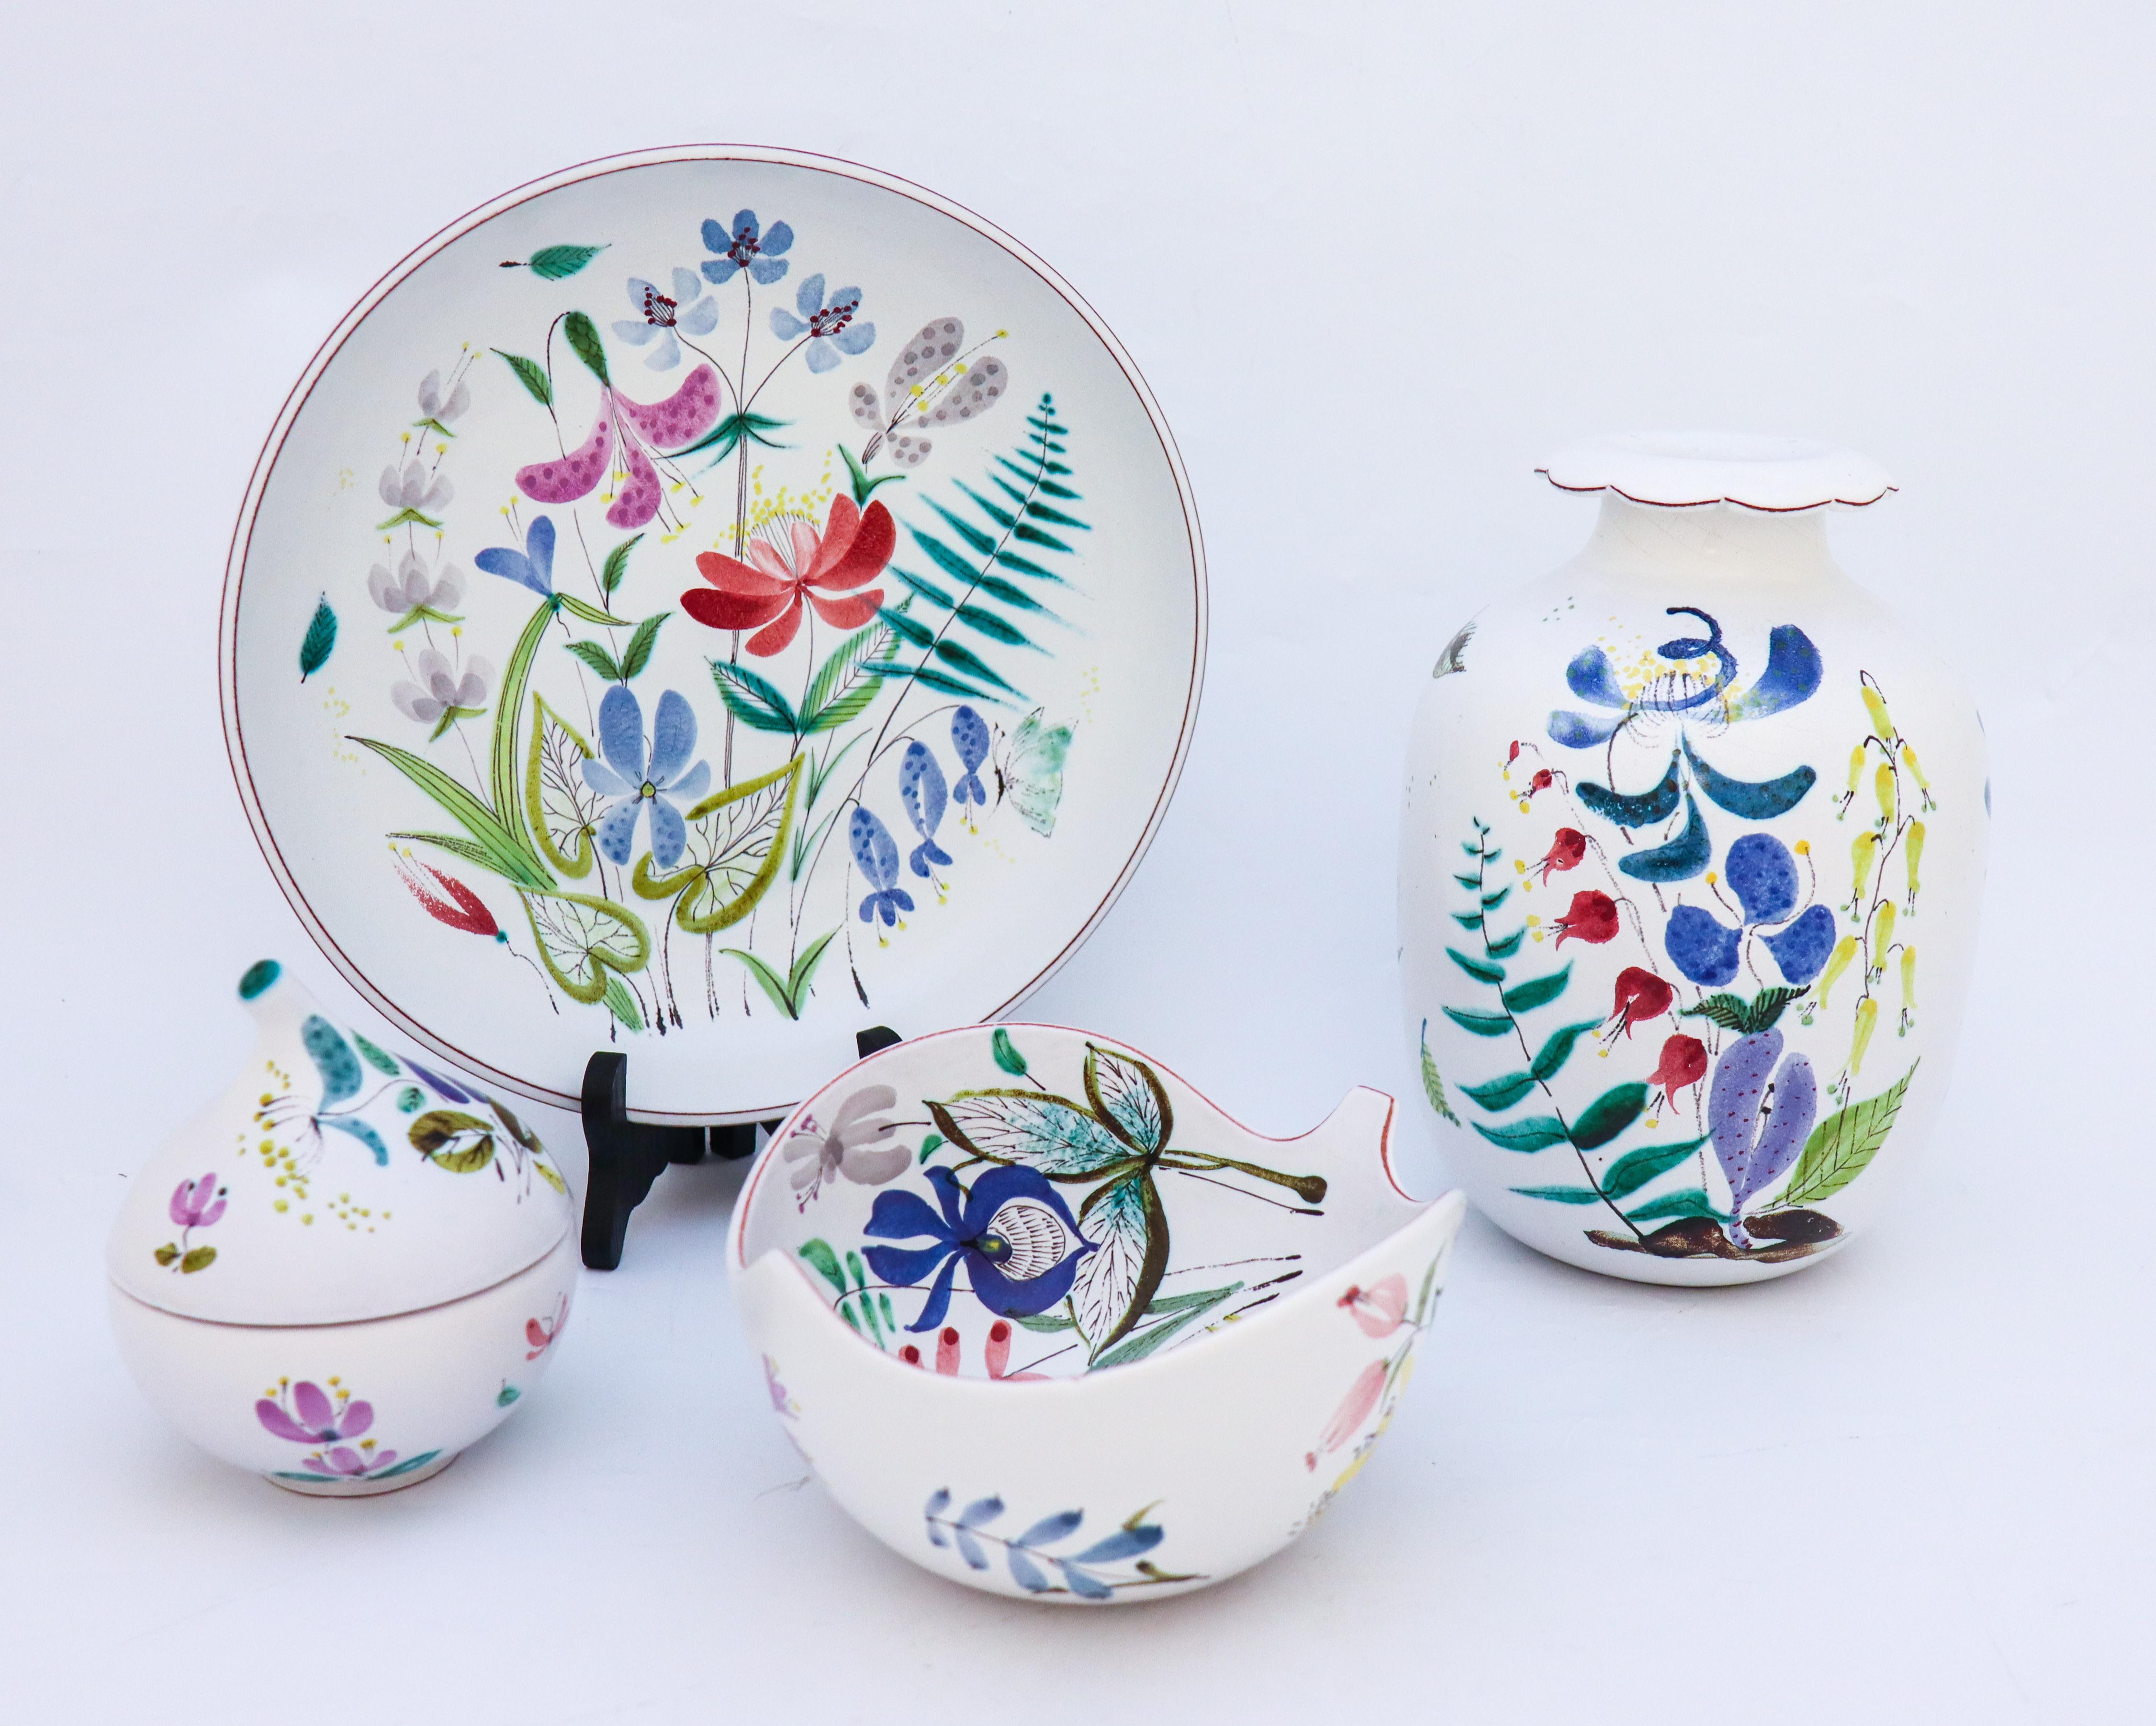 4 faience objects with decor of flowers designed by Stig Lindberg at Gustavsbergs Studio, Sweden. The vase is 21.5 cm high and 14 cm in diameter, the larger bowl is 24.5 cm in diameter and 4.5 cm high. The leaf shaped bowl is 16.5 cm in diameter and